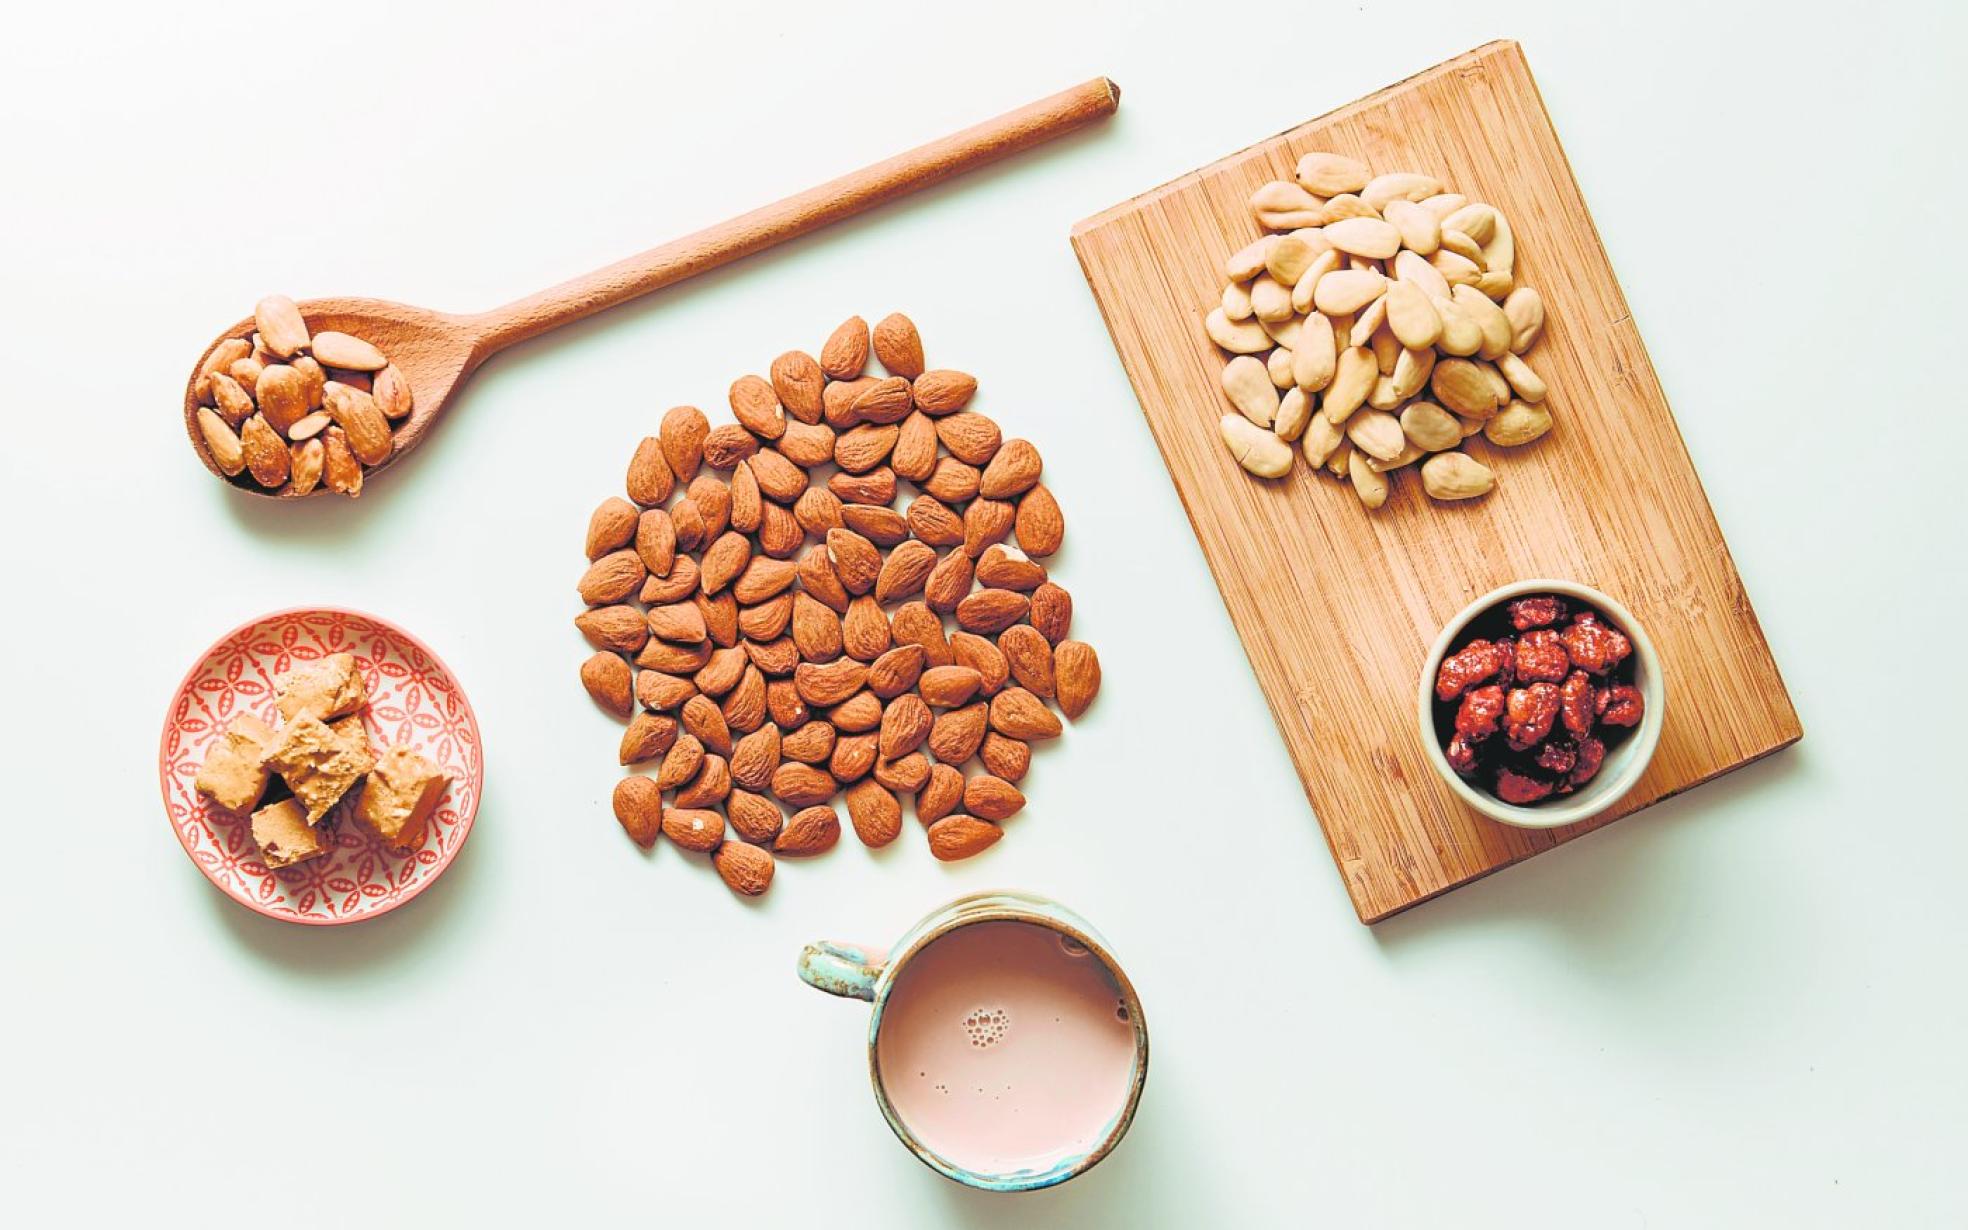 High in calcium and protein, the almond is commonly used in sweet dishes. 